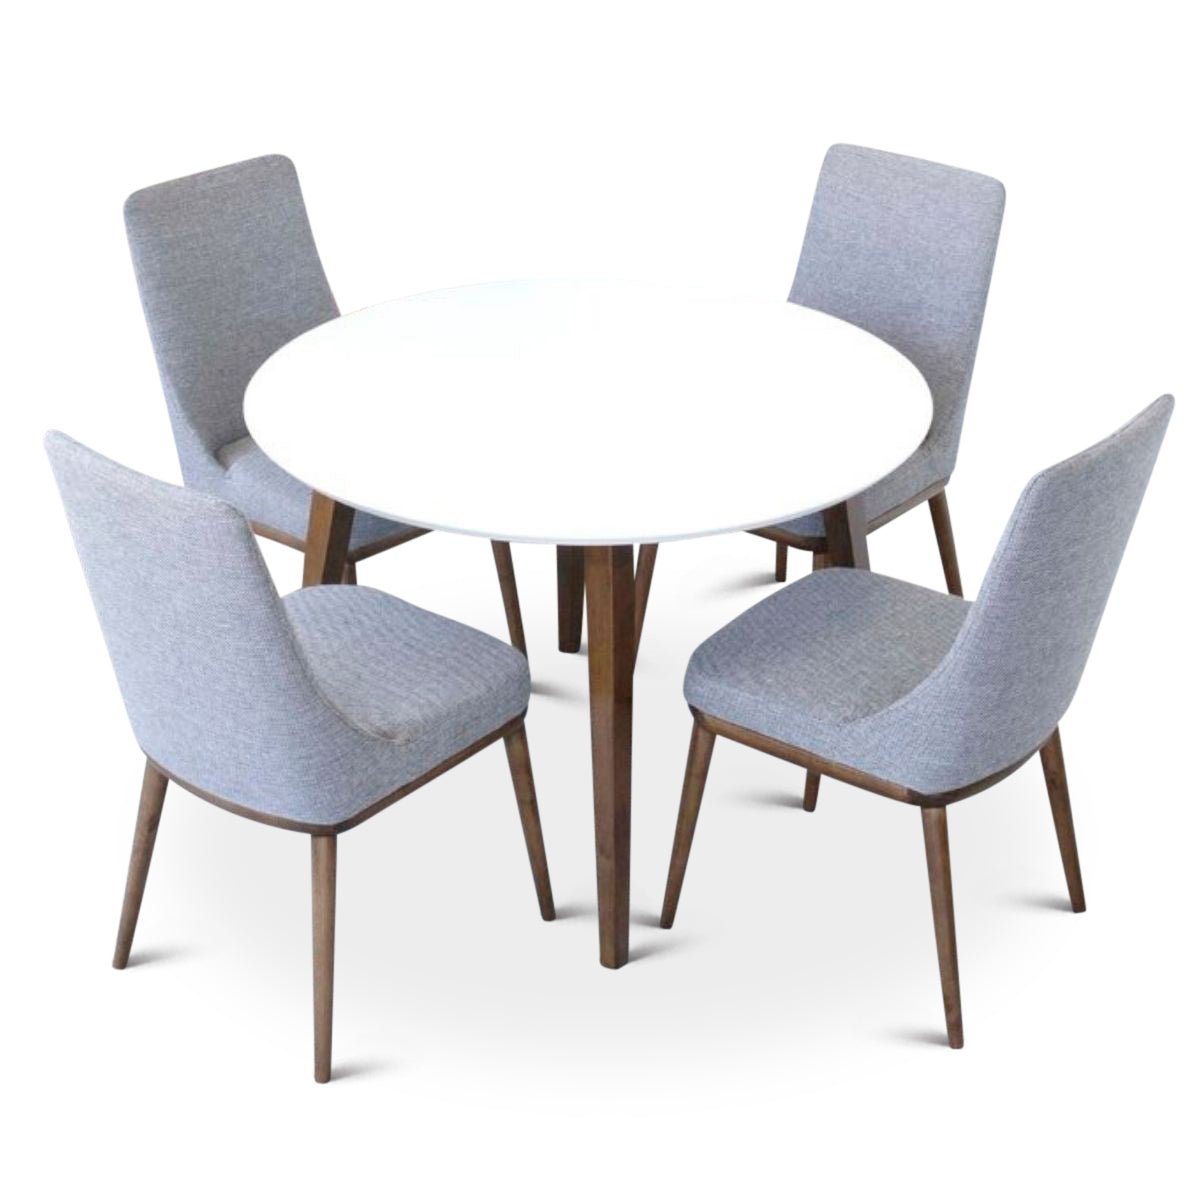 Palmer (White) Dining Set with 4 Brighton (Gray Fabric) Dining Chairs